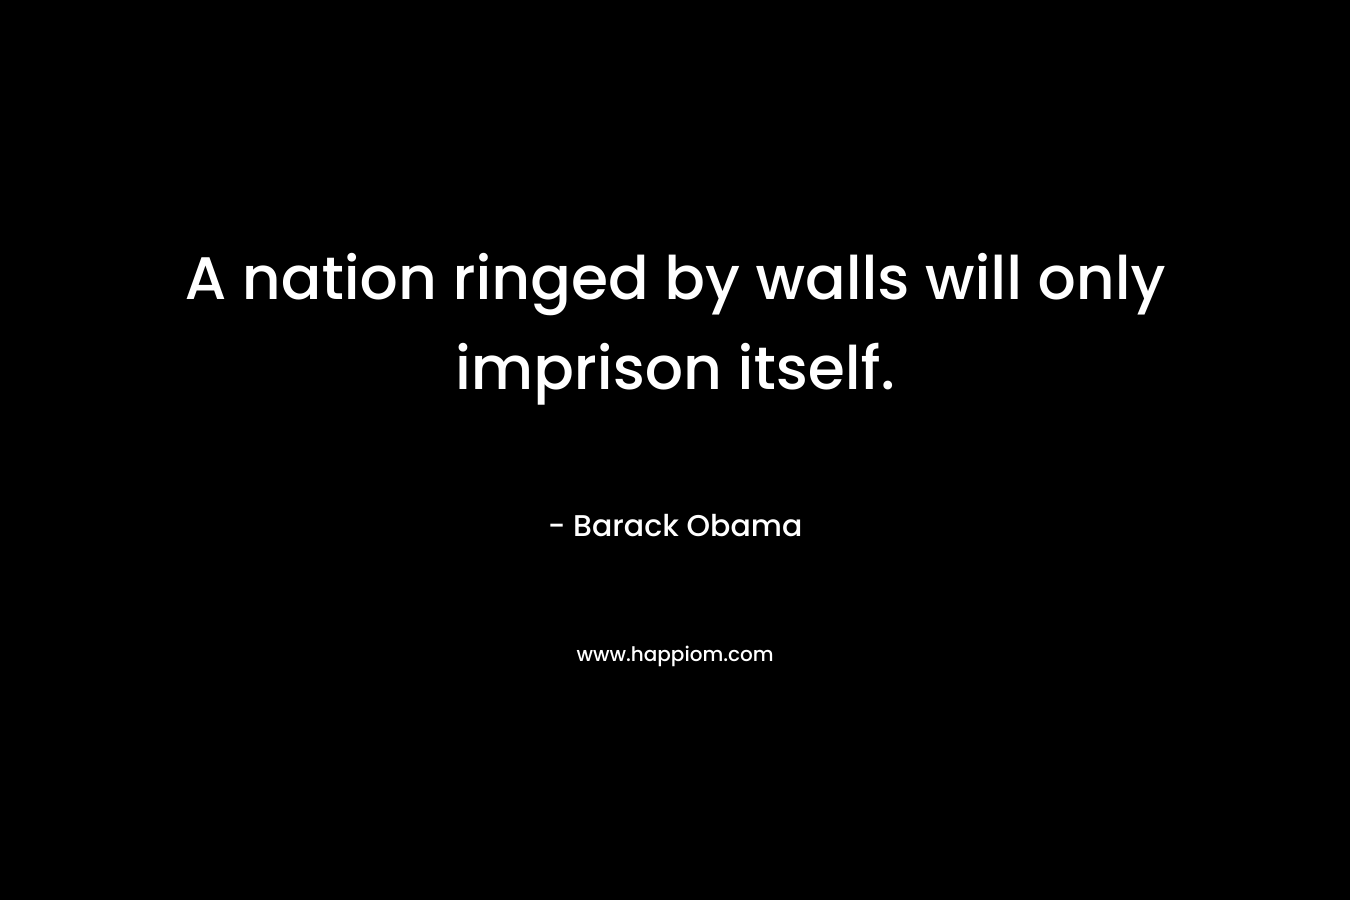 A nation ringed by walls will only imprison itself.